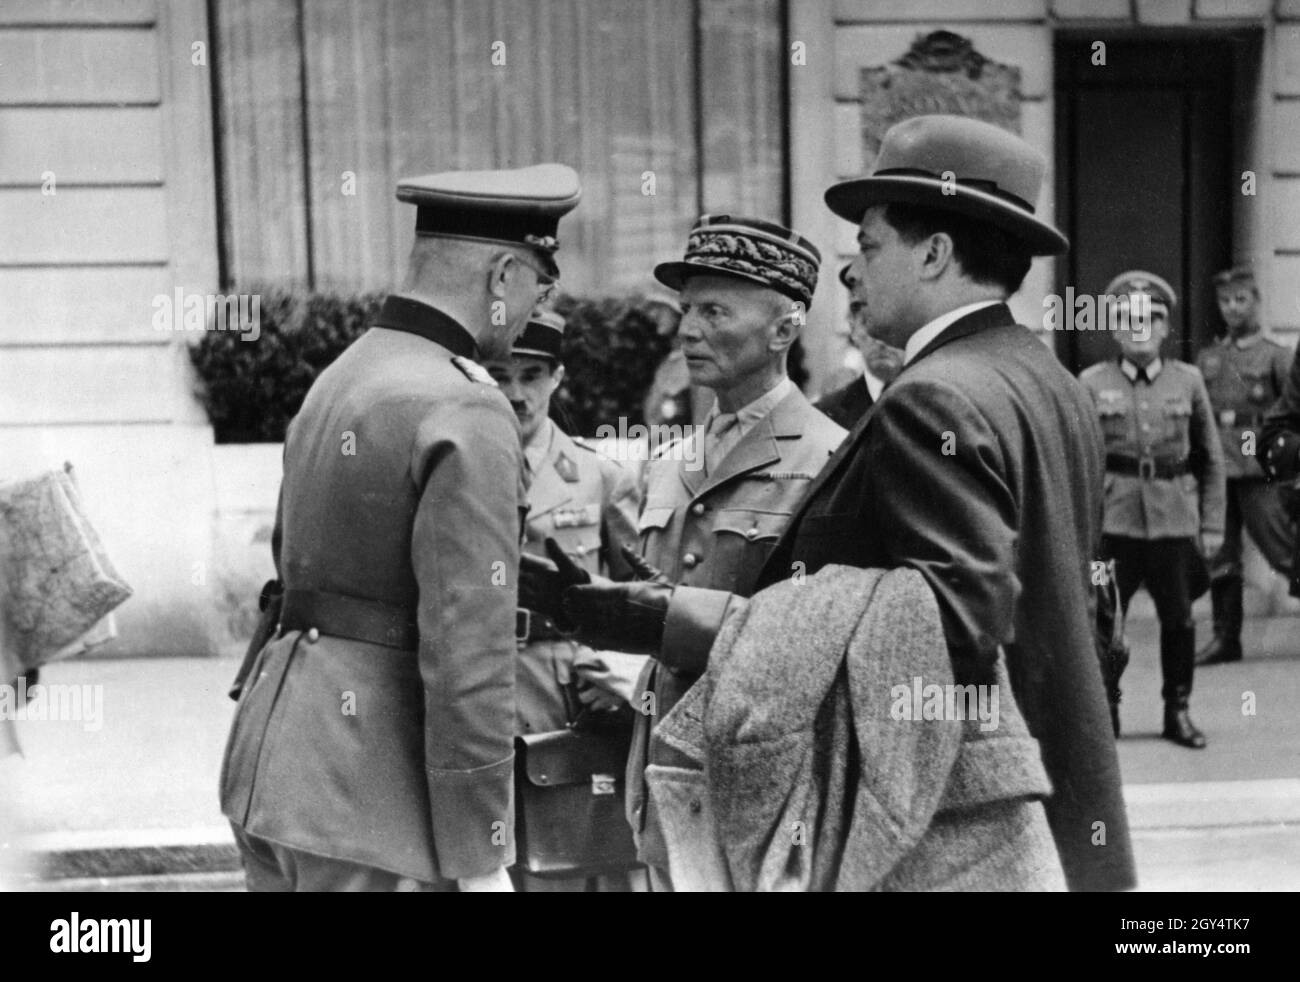 Second World War, Franco-German Armistice Commission: General Charles Huntziger (centre), Chairman of the French Armistice Delegation, talking to a German officer in Paris. [automated translation] Stock Photo